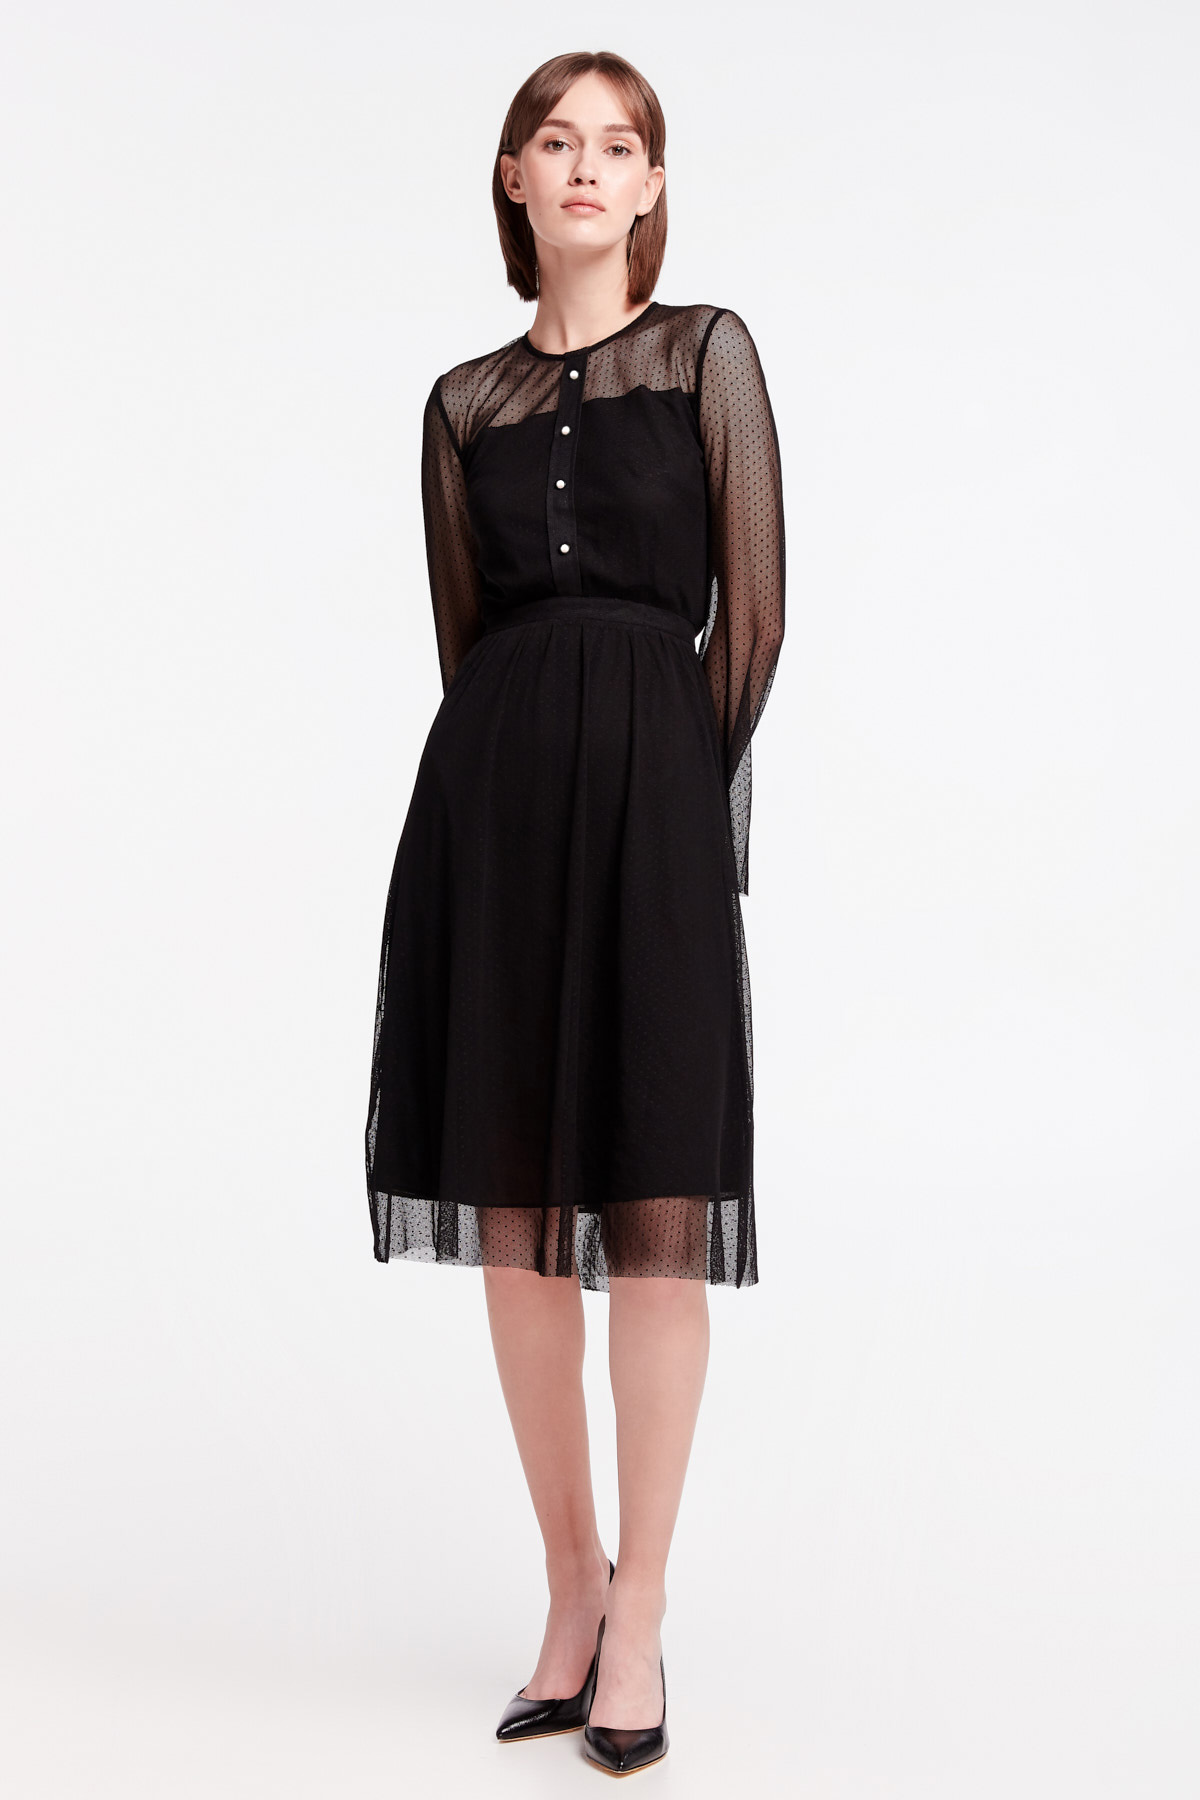 Black lace dress with buttons, photo 10